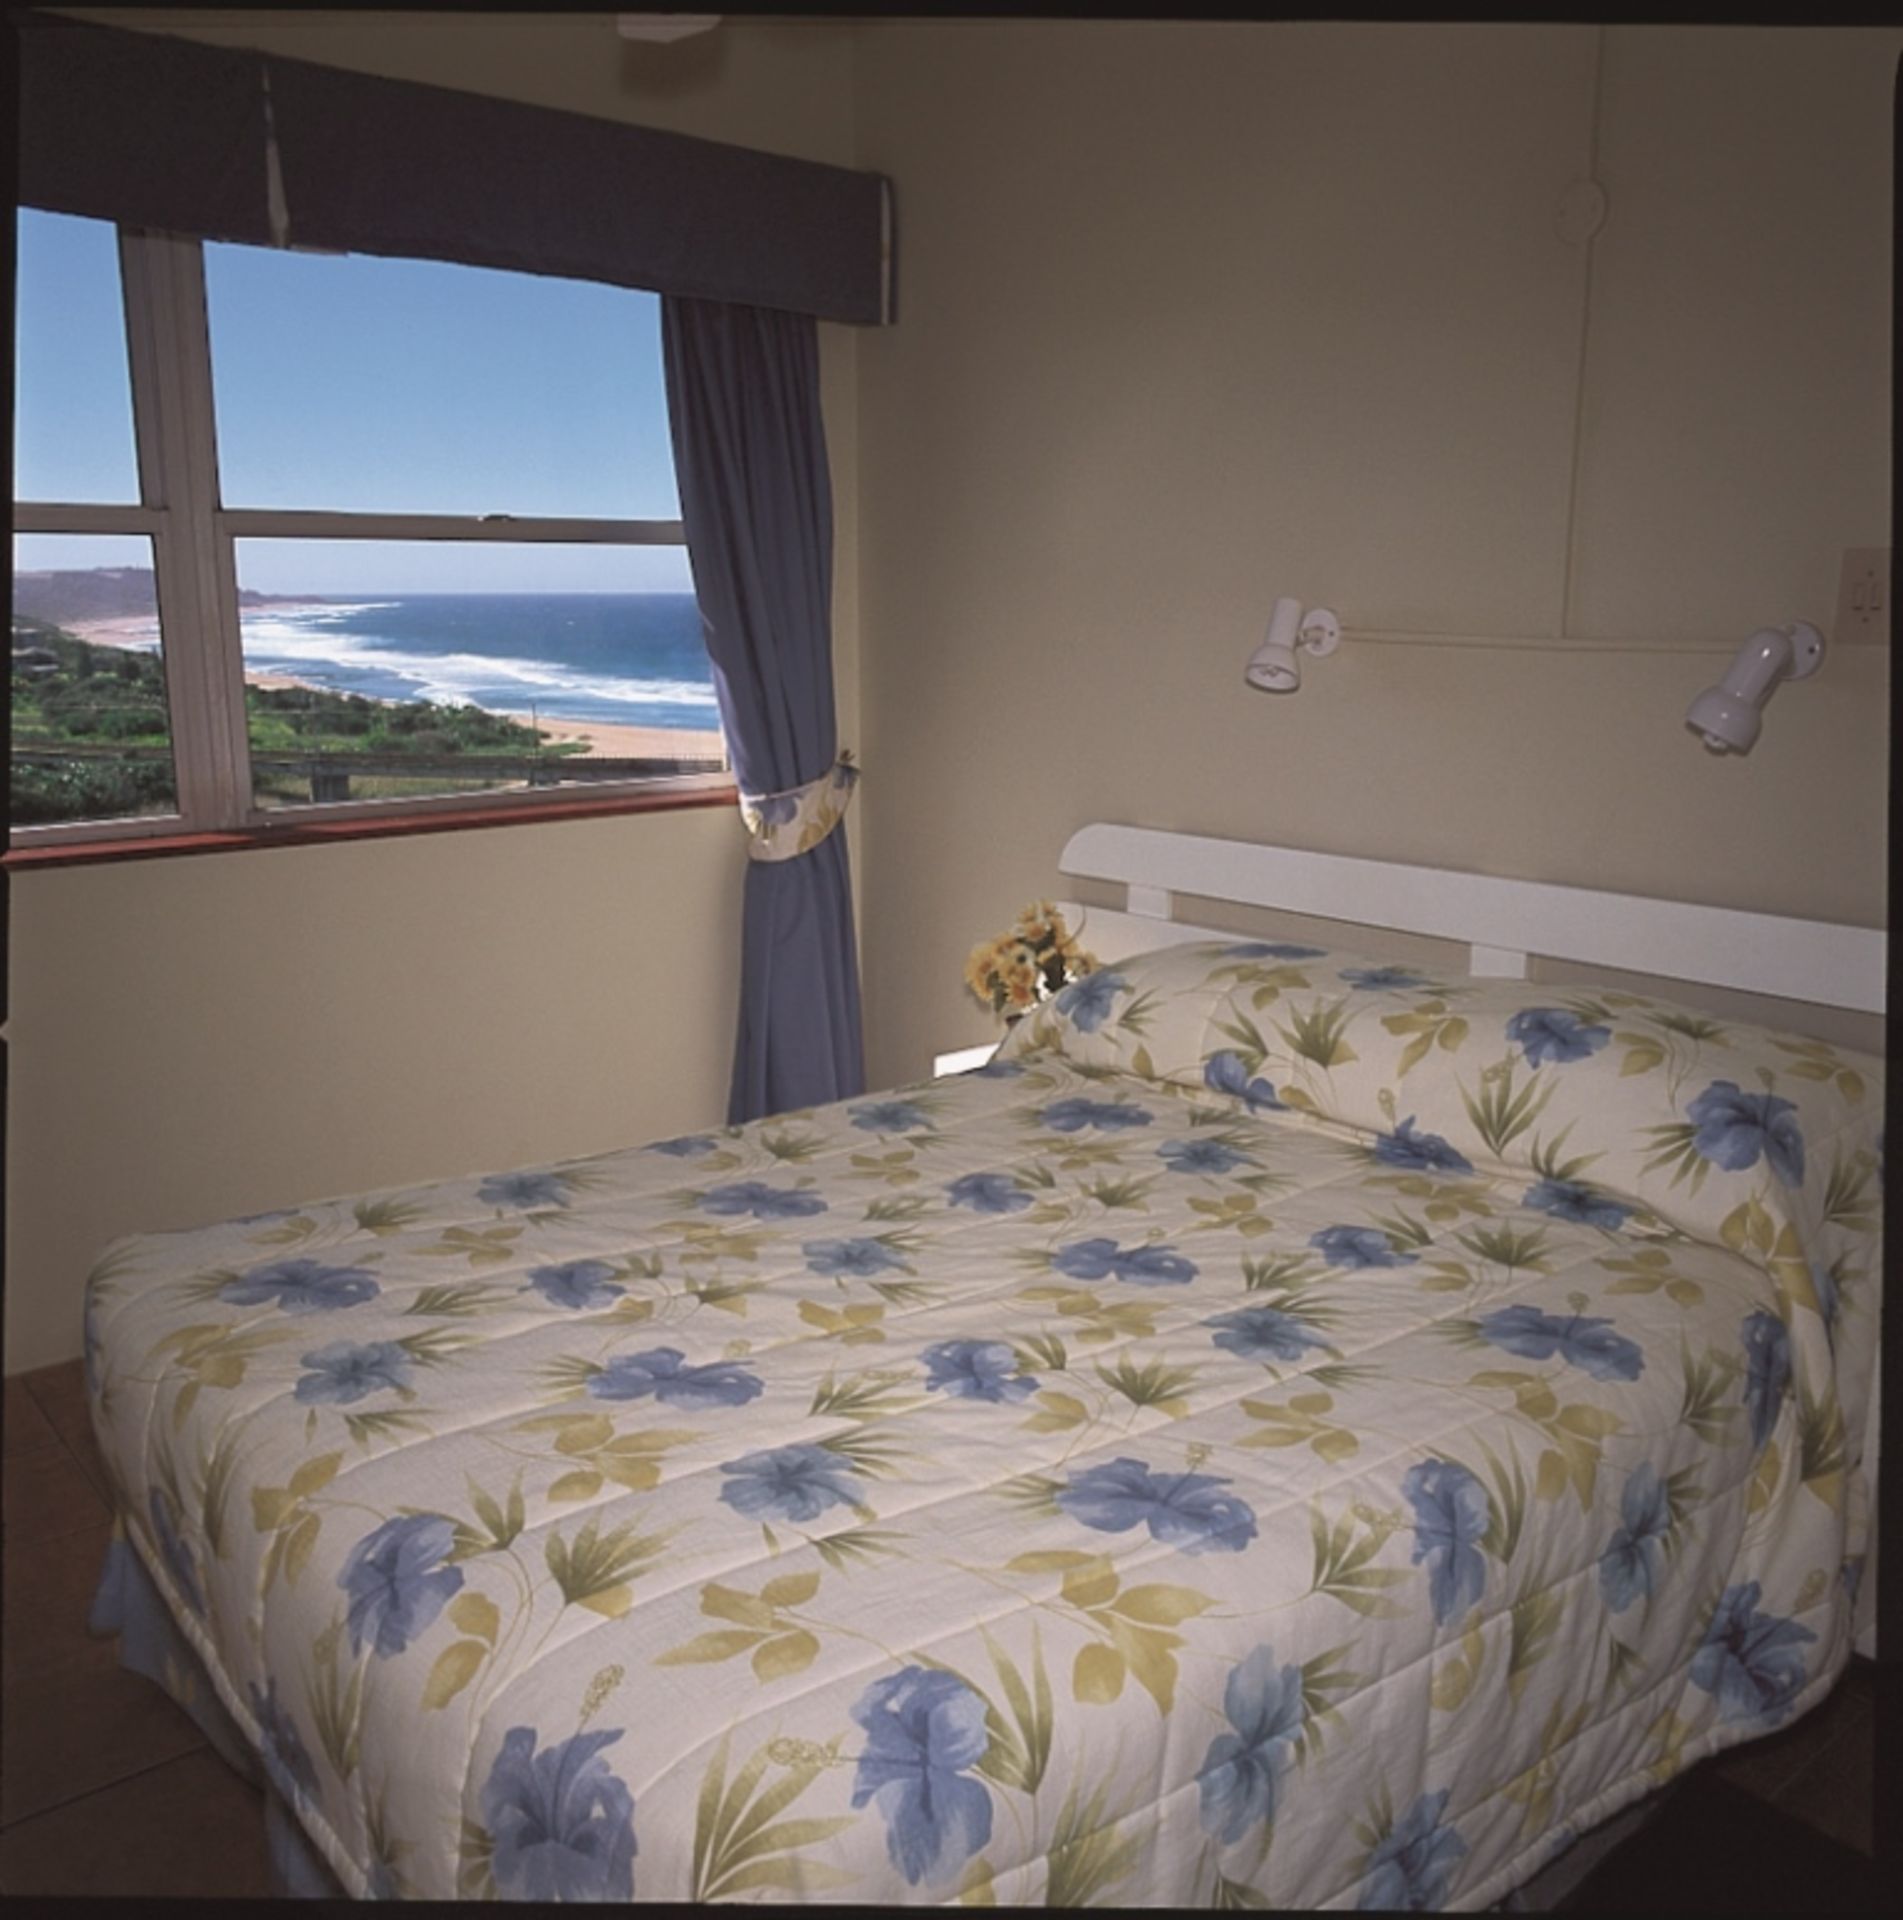 Pearly Shells - 3 Beds (8 Sleepers Max)  . Date - 15/07/2016 - 22/07/2016 - (Shareblock) - Image 26 of 32